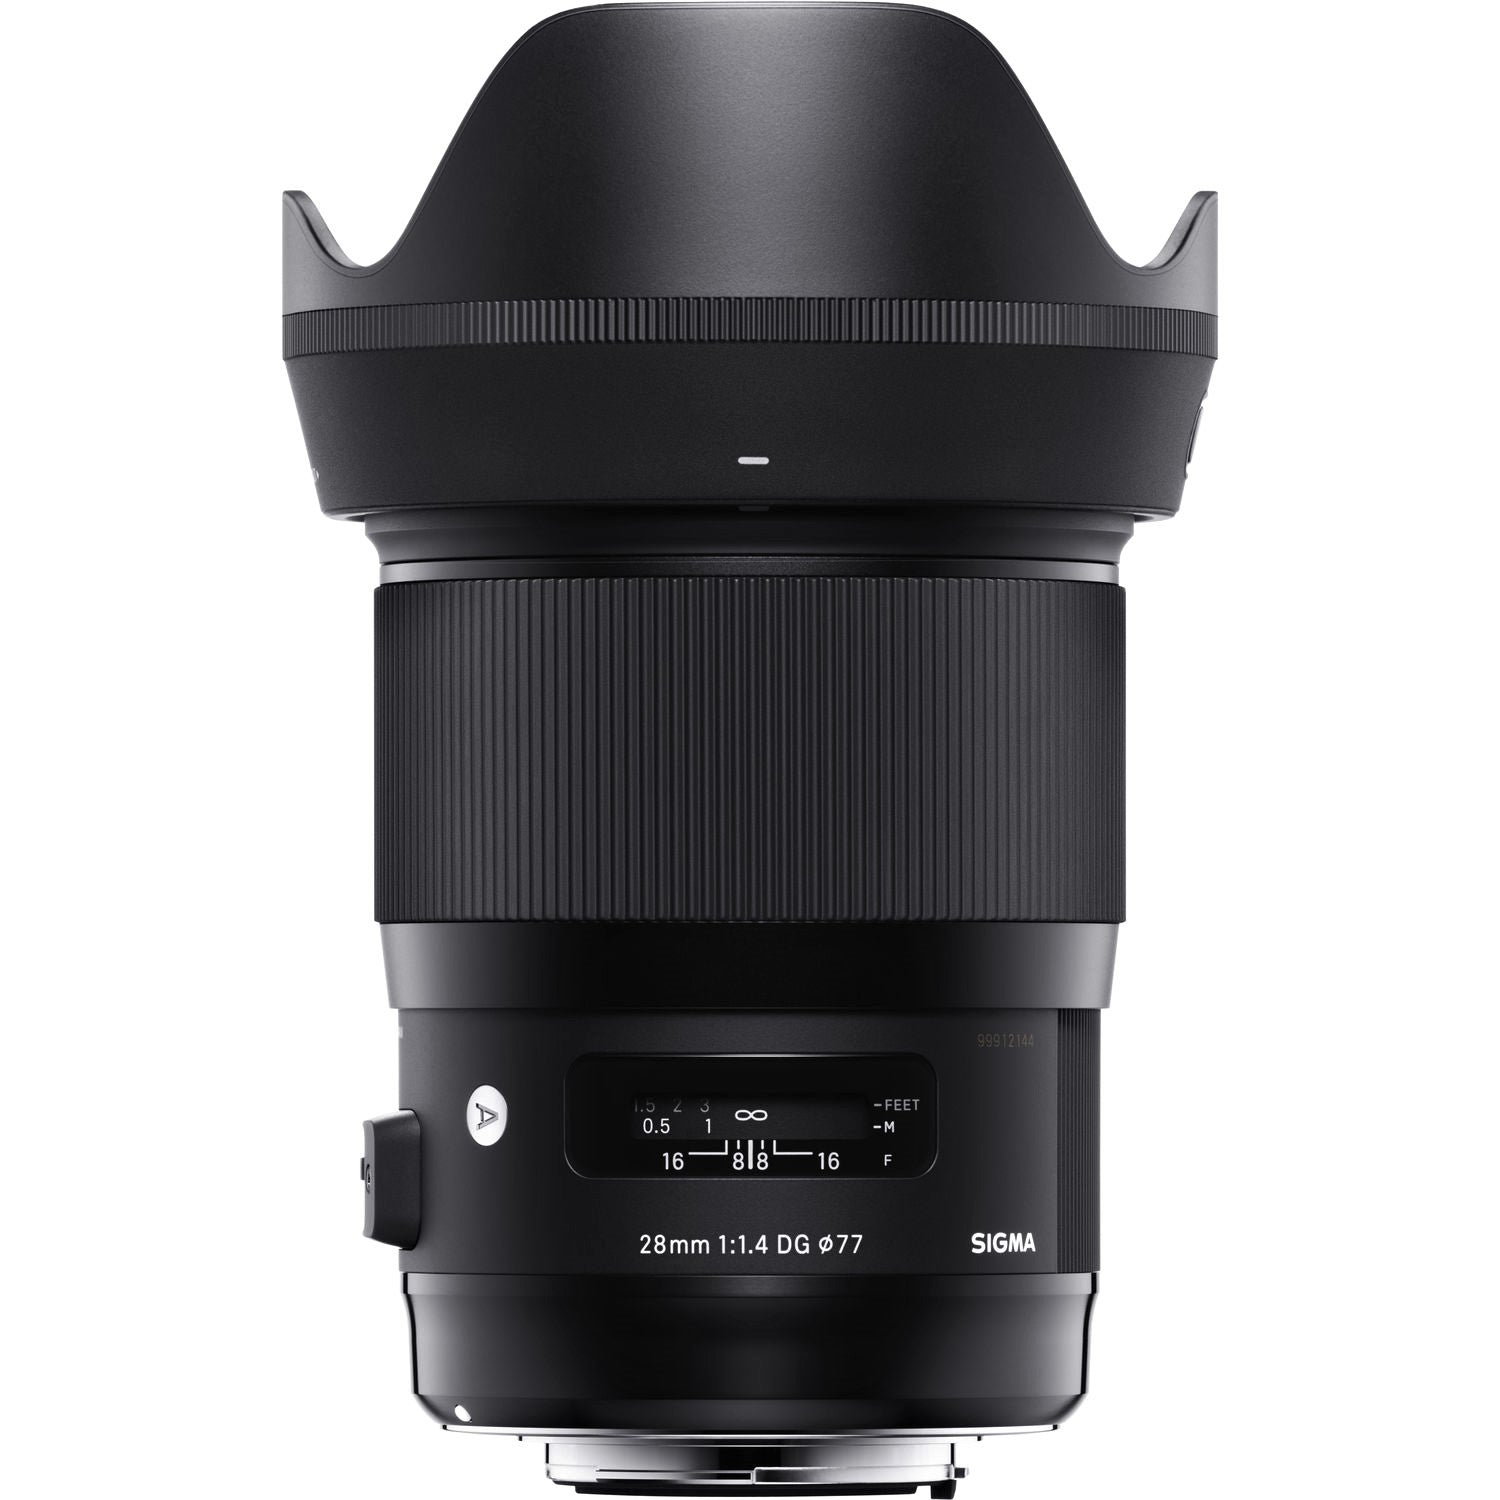 Sigma 28mm F1.4 DG HSM Art Lens for Sigma SA with Attached Lens Hood on the Top